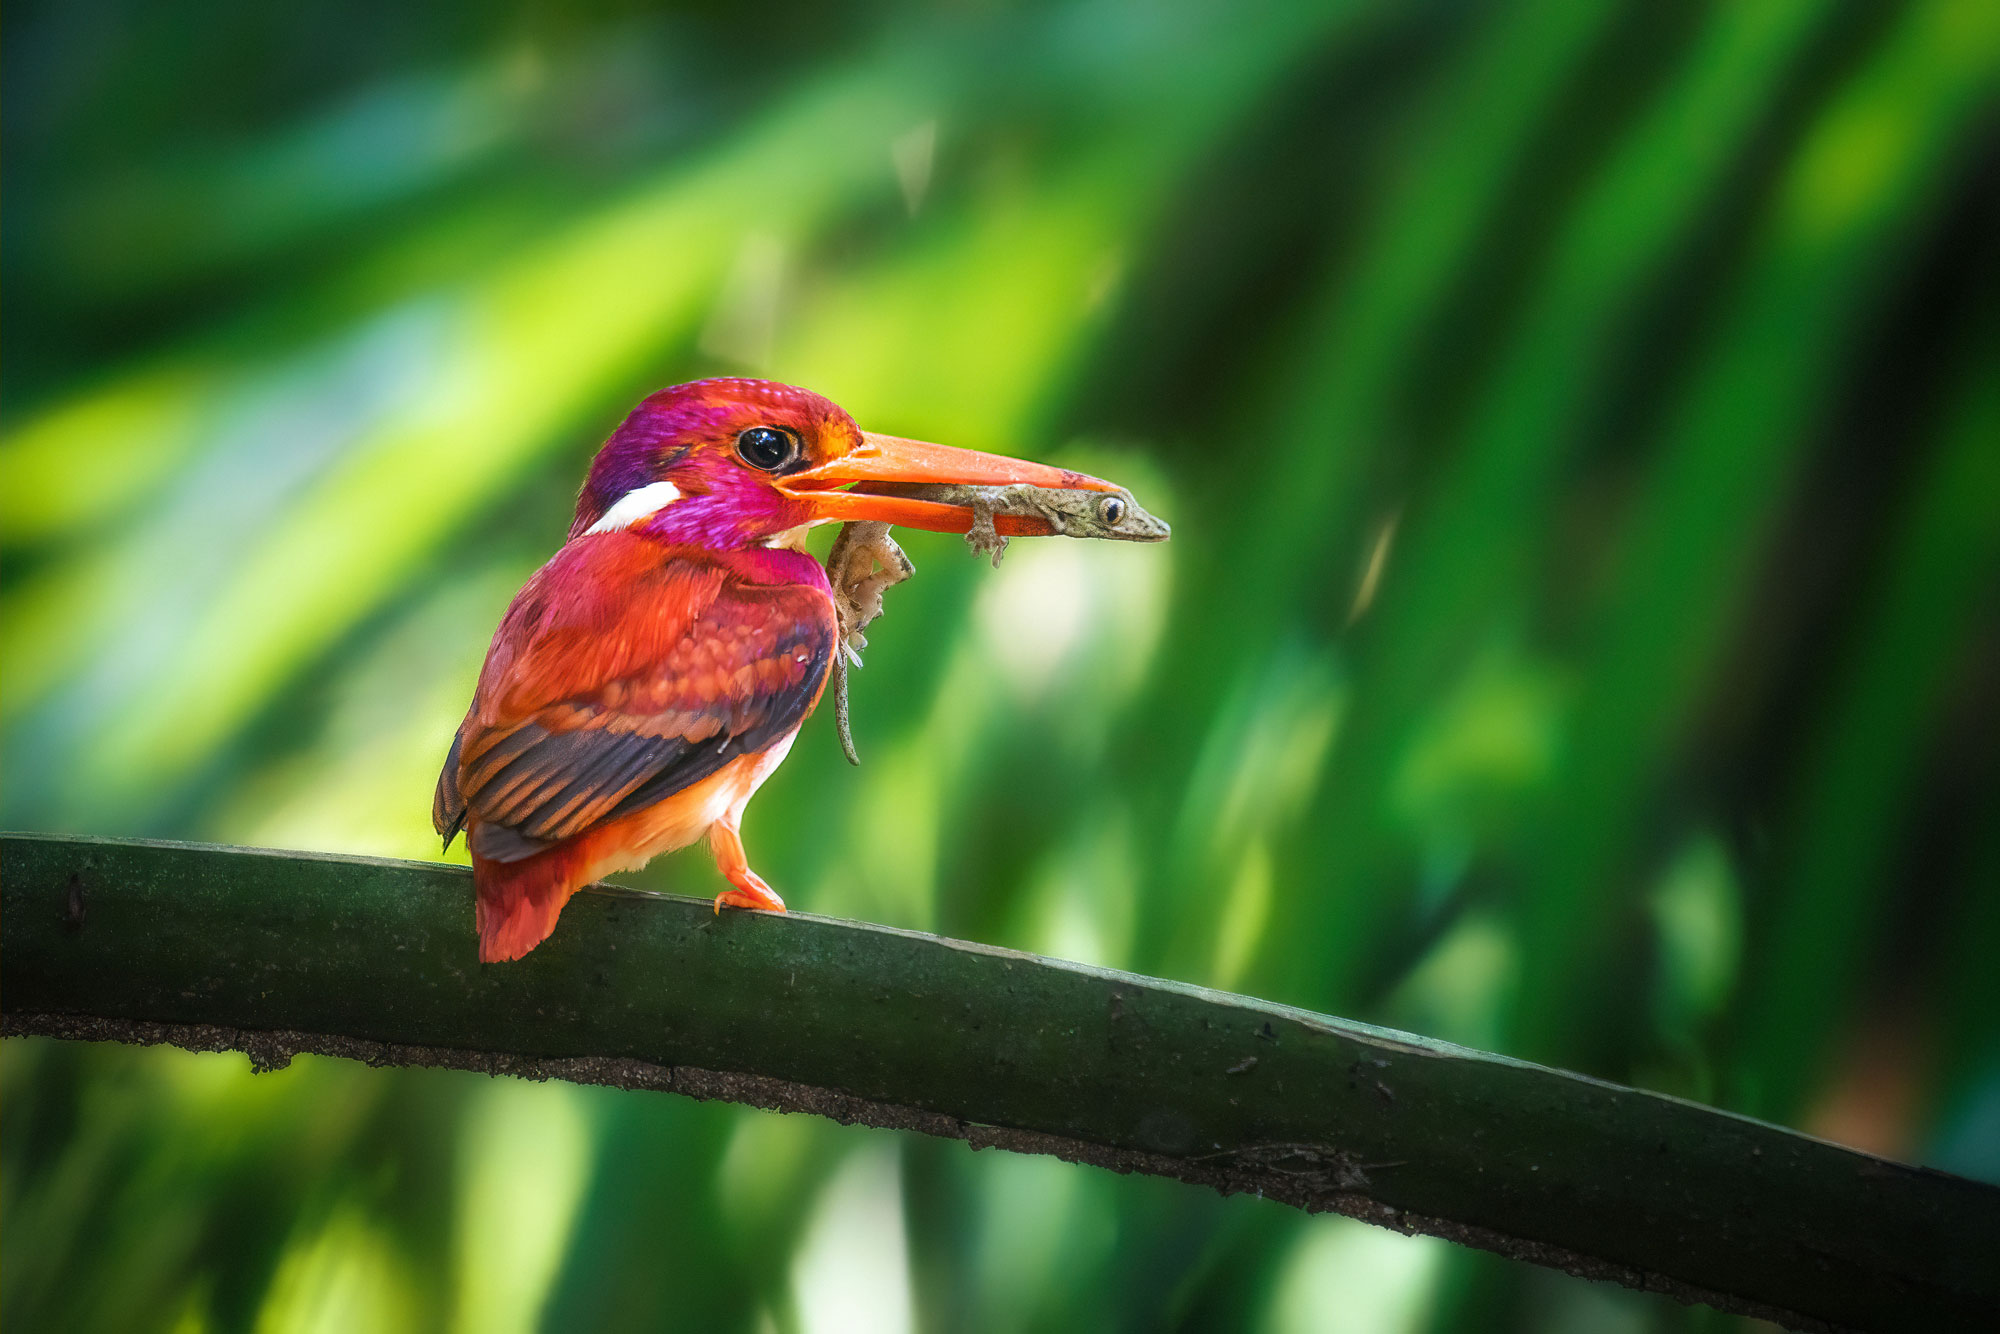 Photograph of a Philippine southern dwarf kingfisher sitting on the talk of a leaf. The photo shows a small, brightly colored bird with a lizard in its beak. The bird is hot pink and bright orange with some black on its wings.